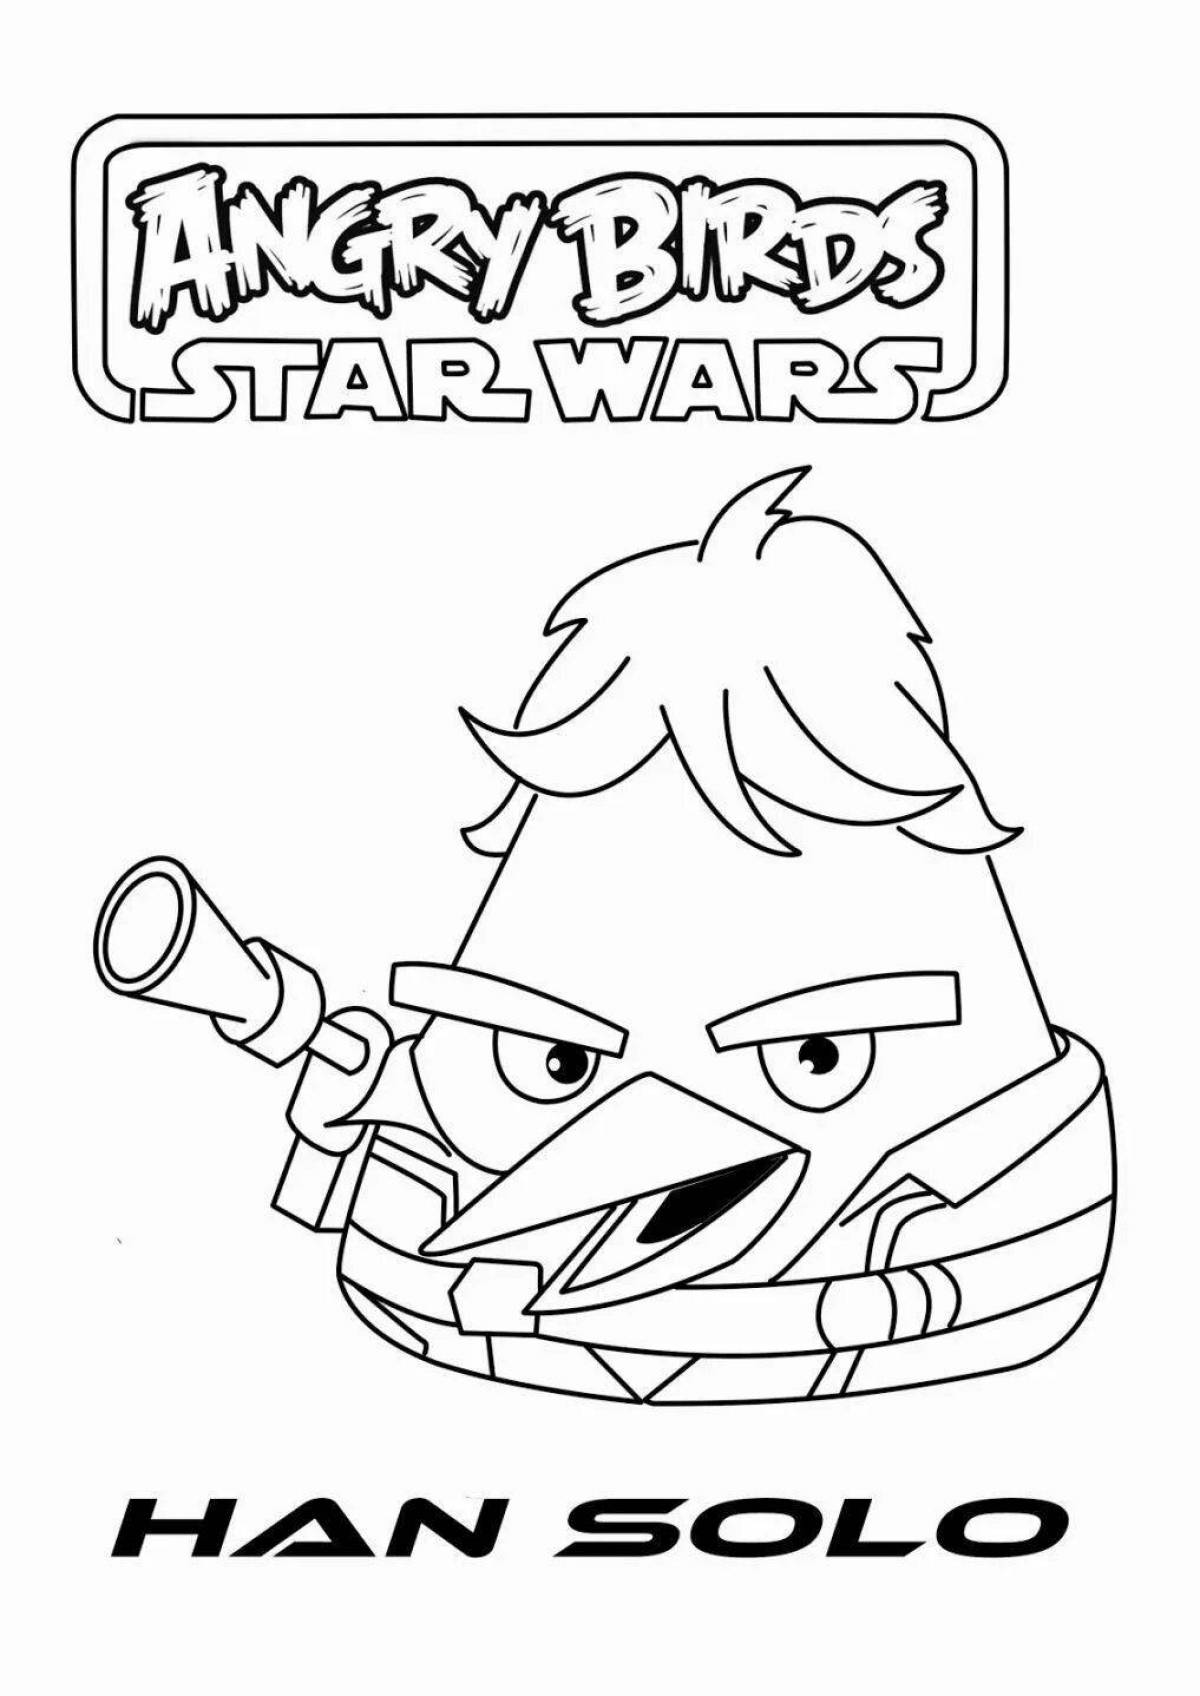 Exquisite angry birds star wars coloring book